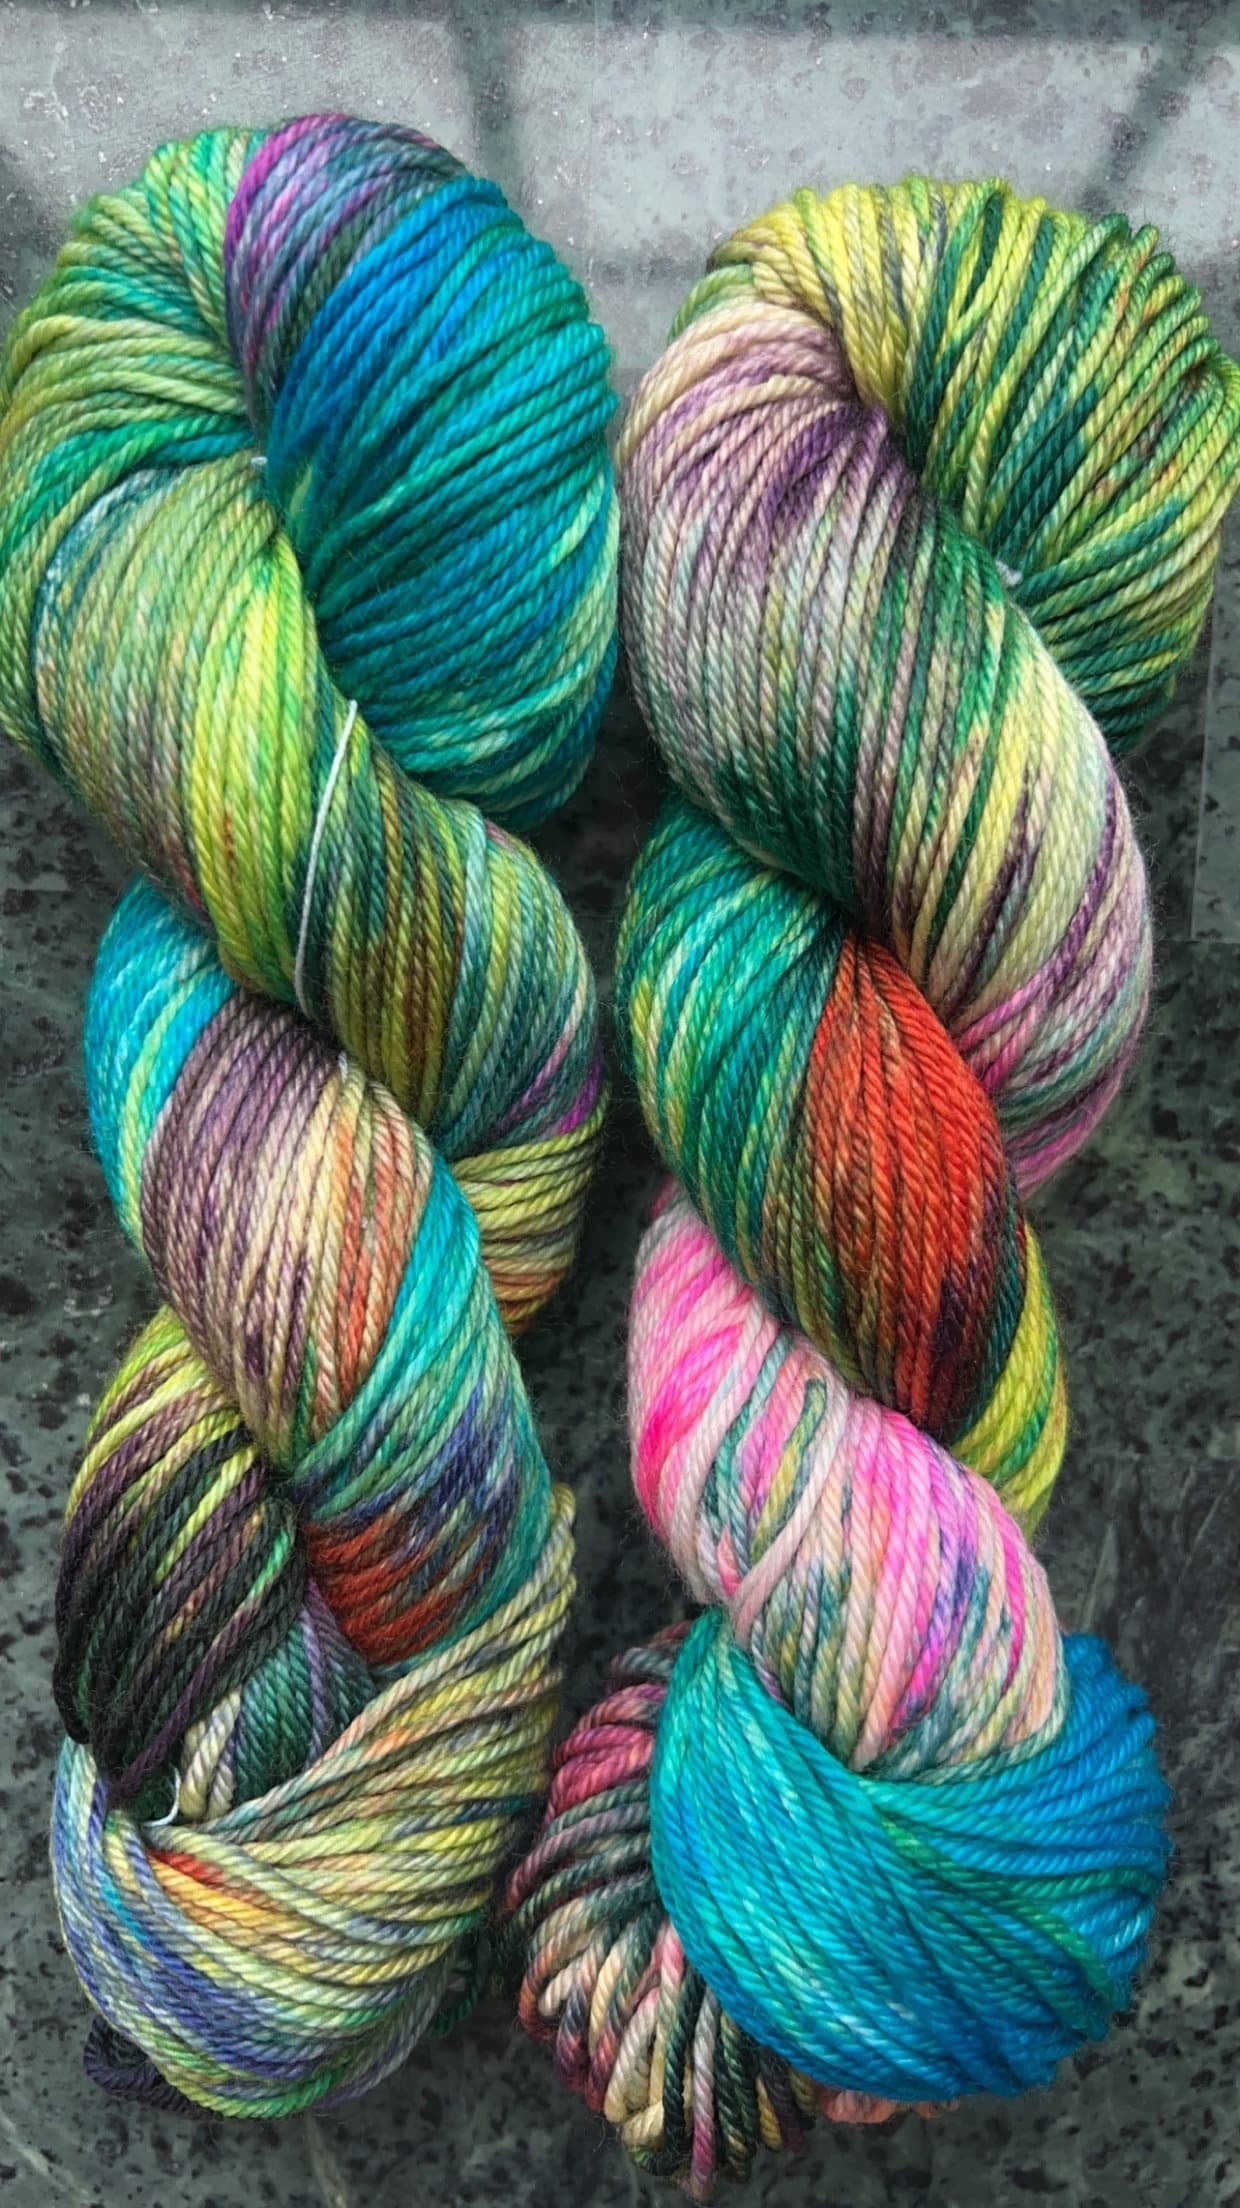 Hand-Dyed Merino Wool Yarn - Soft and Durable Yarn for Knitting and Crocheting | Indie Dyed Merino Wool | Worsted | Fever Dream